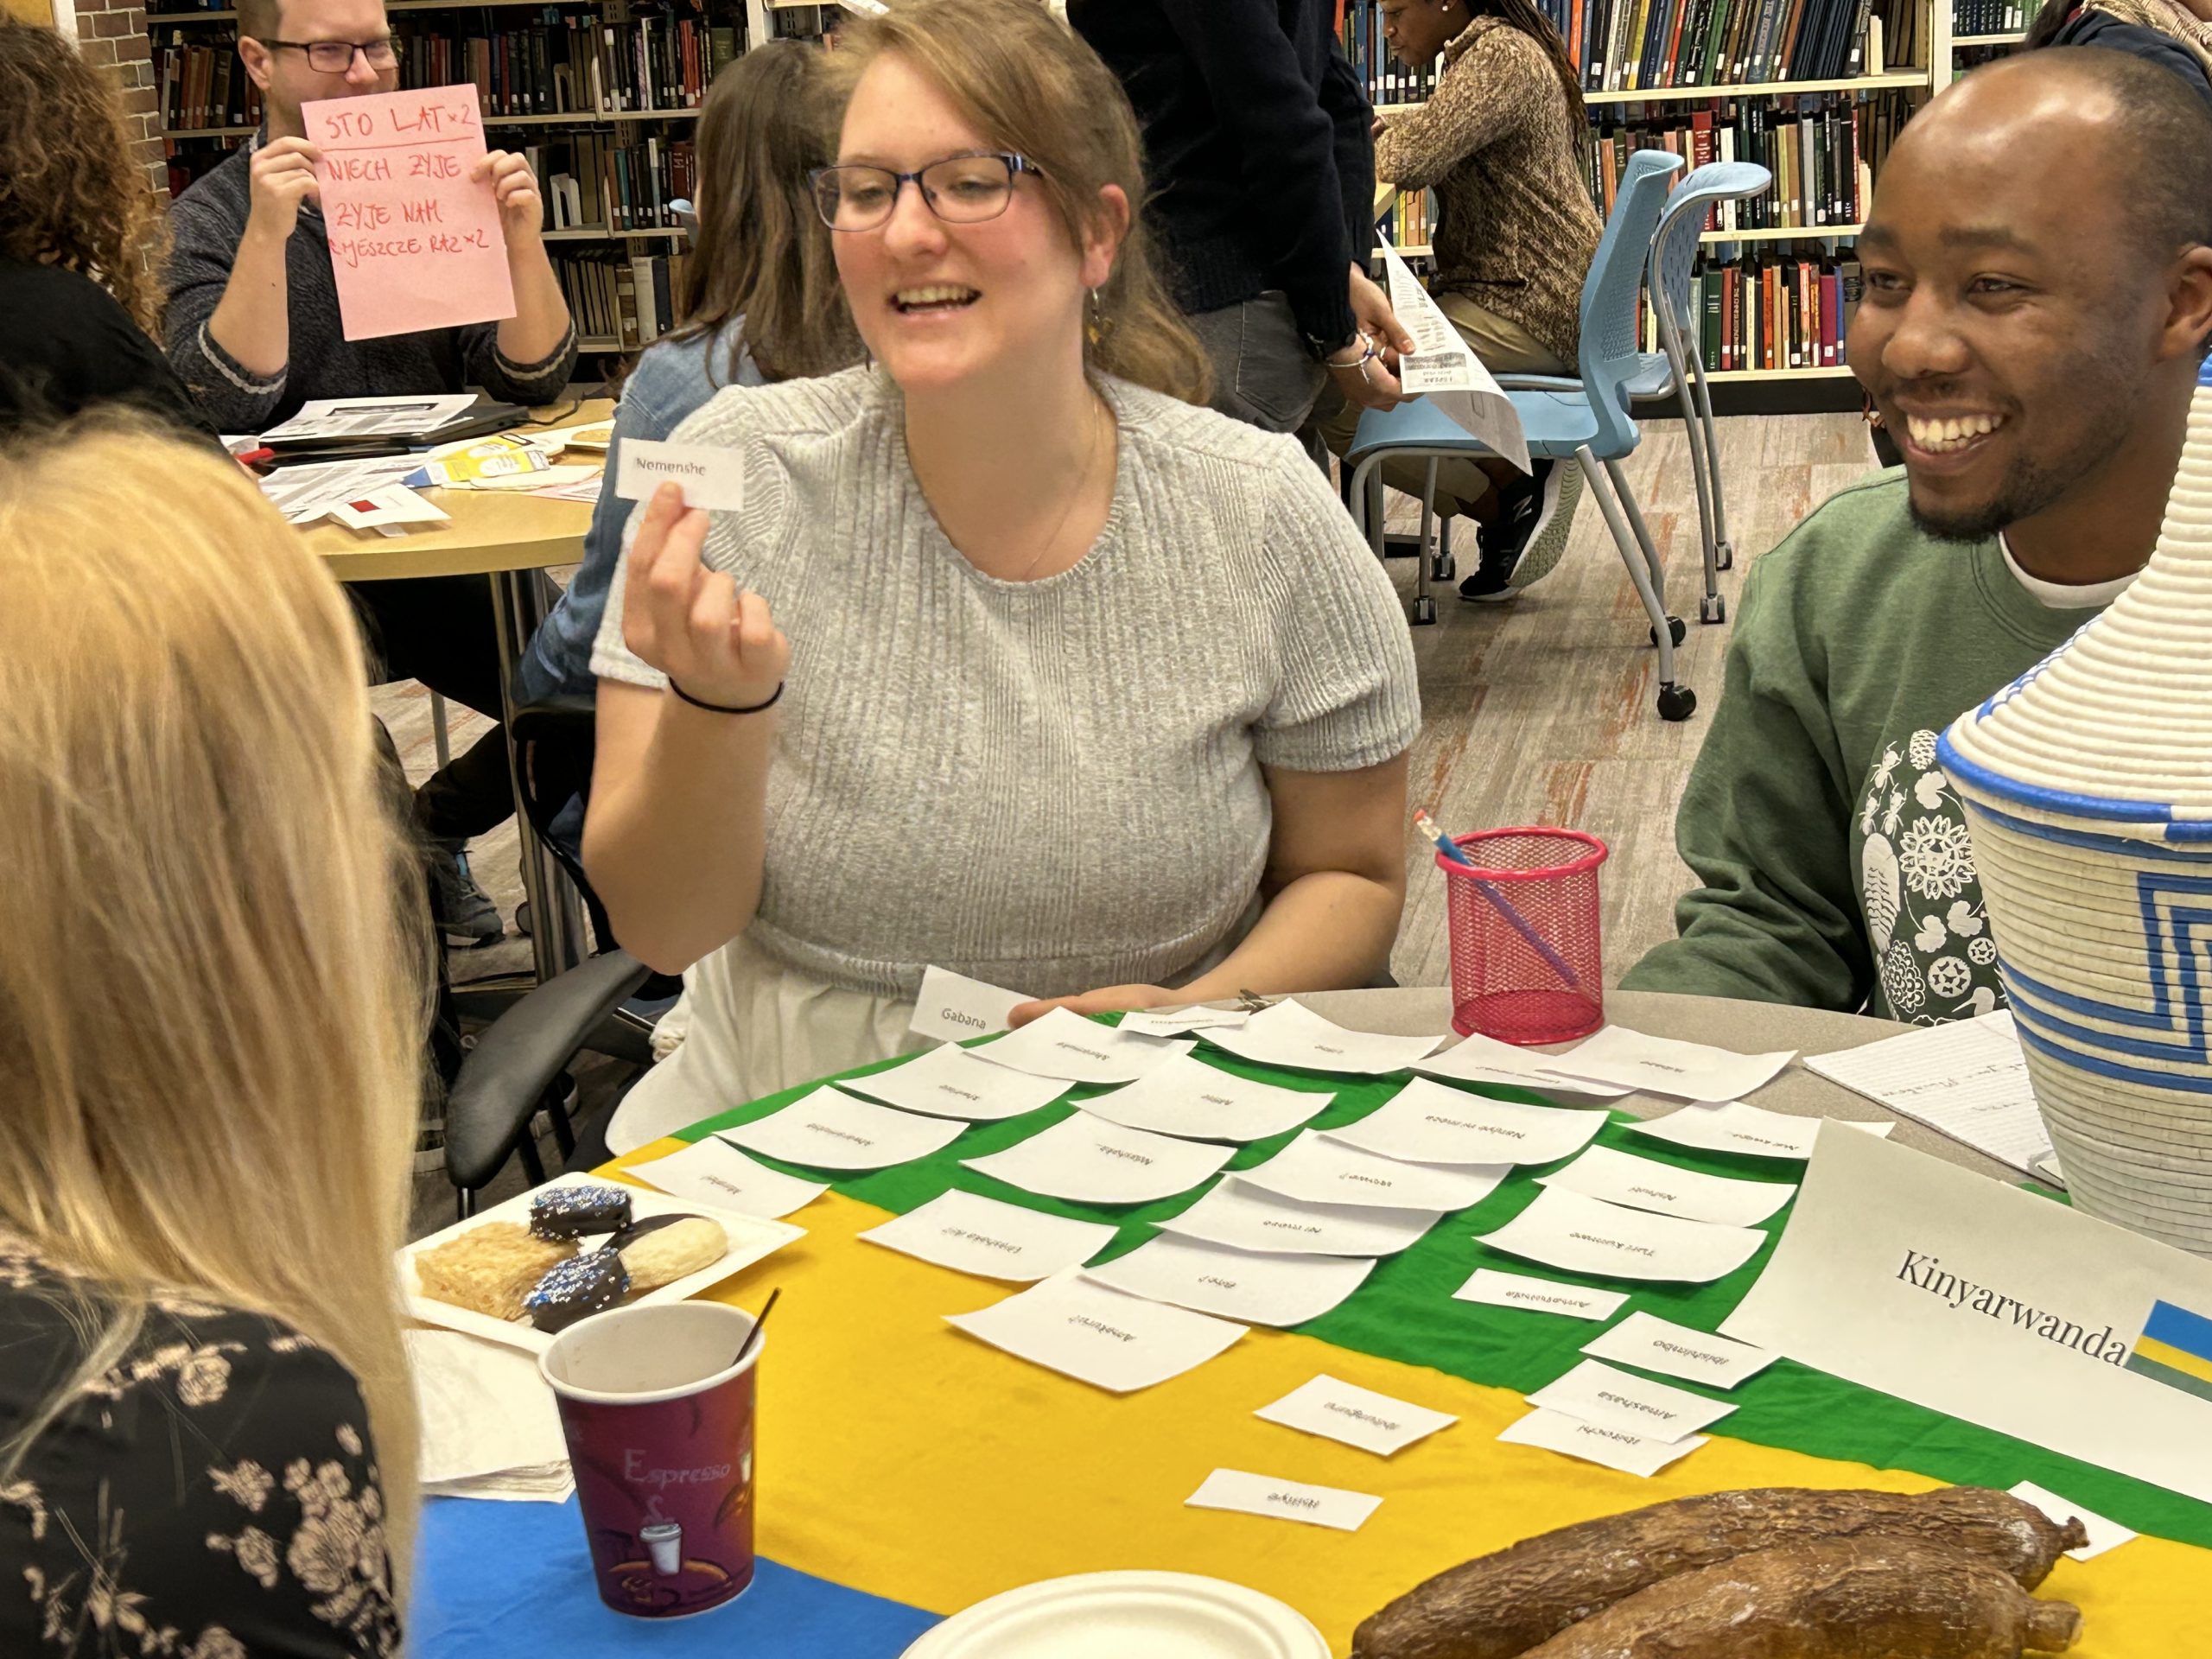 Photo of two individuals, Margaret, co-author of this article and Lucky, writing center visitor, teaching Kinyarwanda. The table where they sit is covered by a Rwandan flag, topped with a sign that says "Kinyarwanda," and flashcards with Kinyarwanda words and phrases.